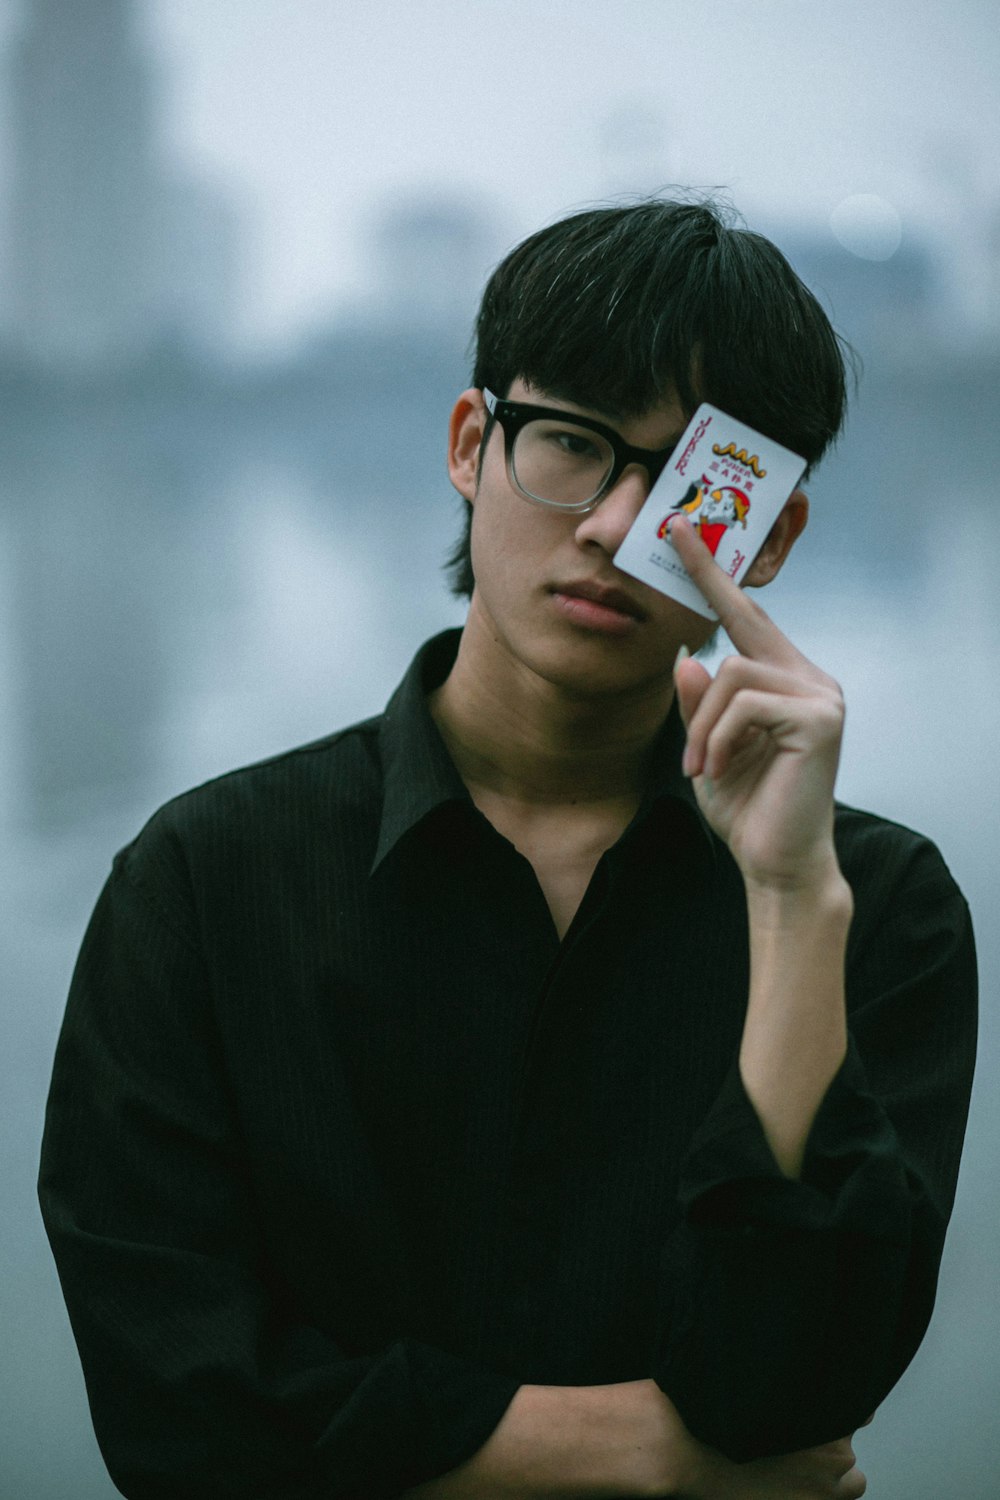 a man with glasses holding a card in front of his face